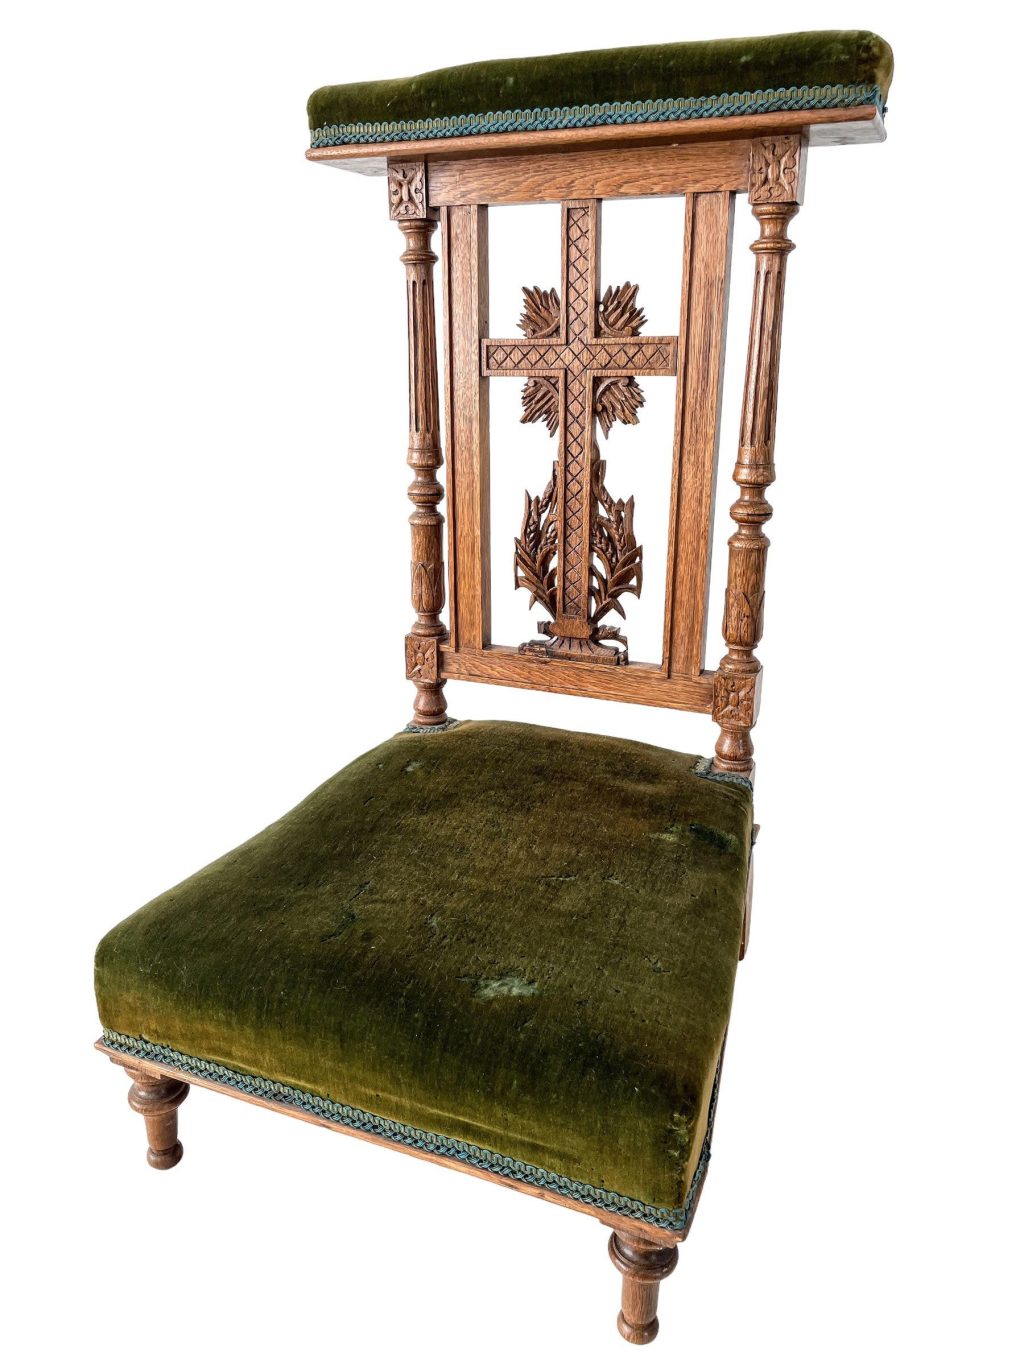 Antique French Prayer Chair Kneeler Cushioned Chair Wooden Green Upholstery Rest Seating Child Children c1910-20’s